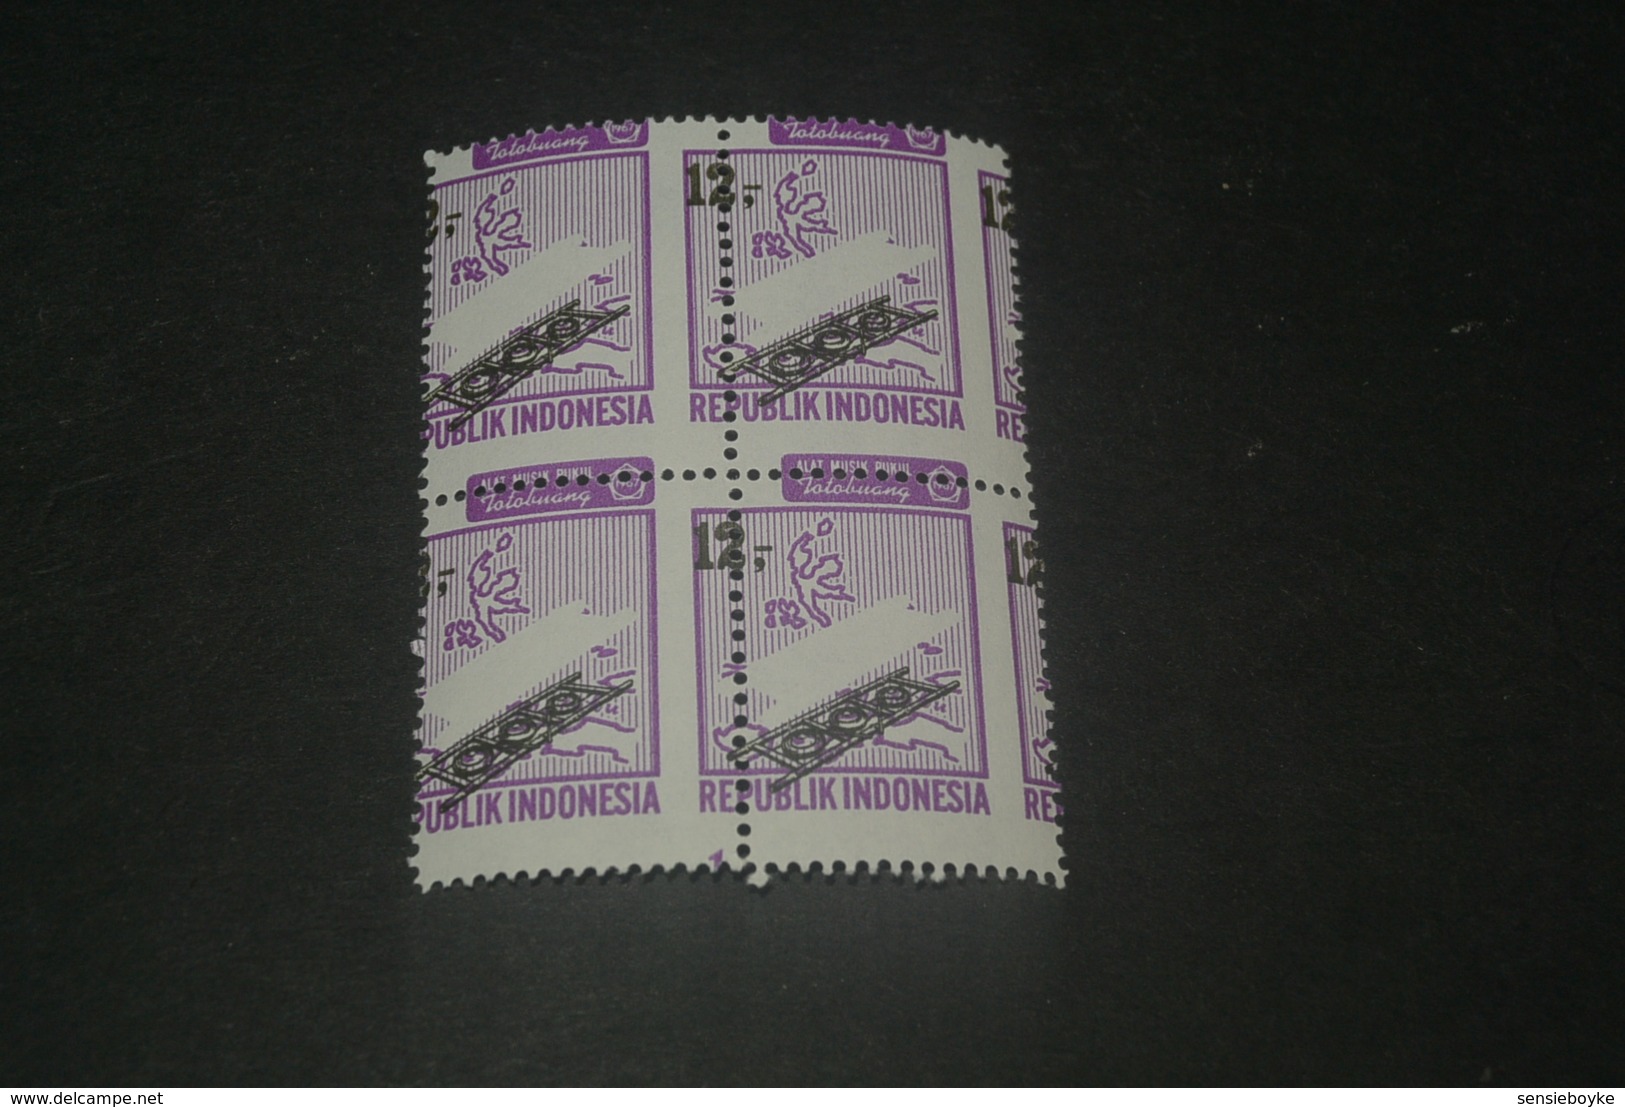 K19764 - Bloc Of 4  - Wrong Perforation MNH Indonesia - 1967 - SC. 717 - Totobuang , Moluccas - Indonesia